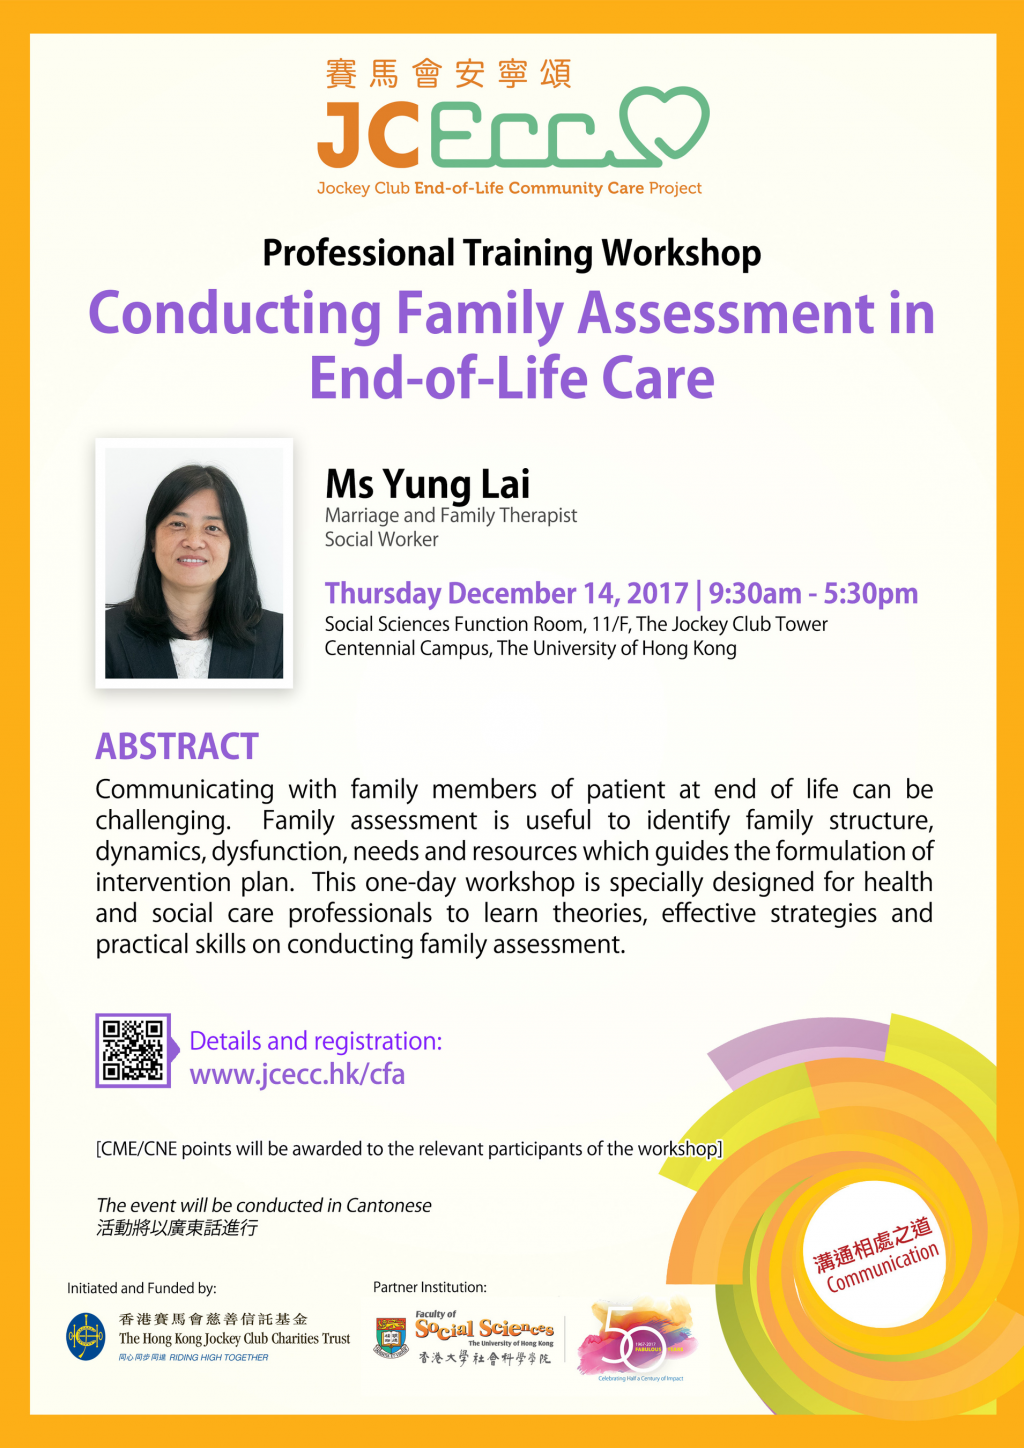 JCECC Workshop on Conducting Family Assessment in End-of-Life Care